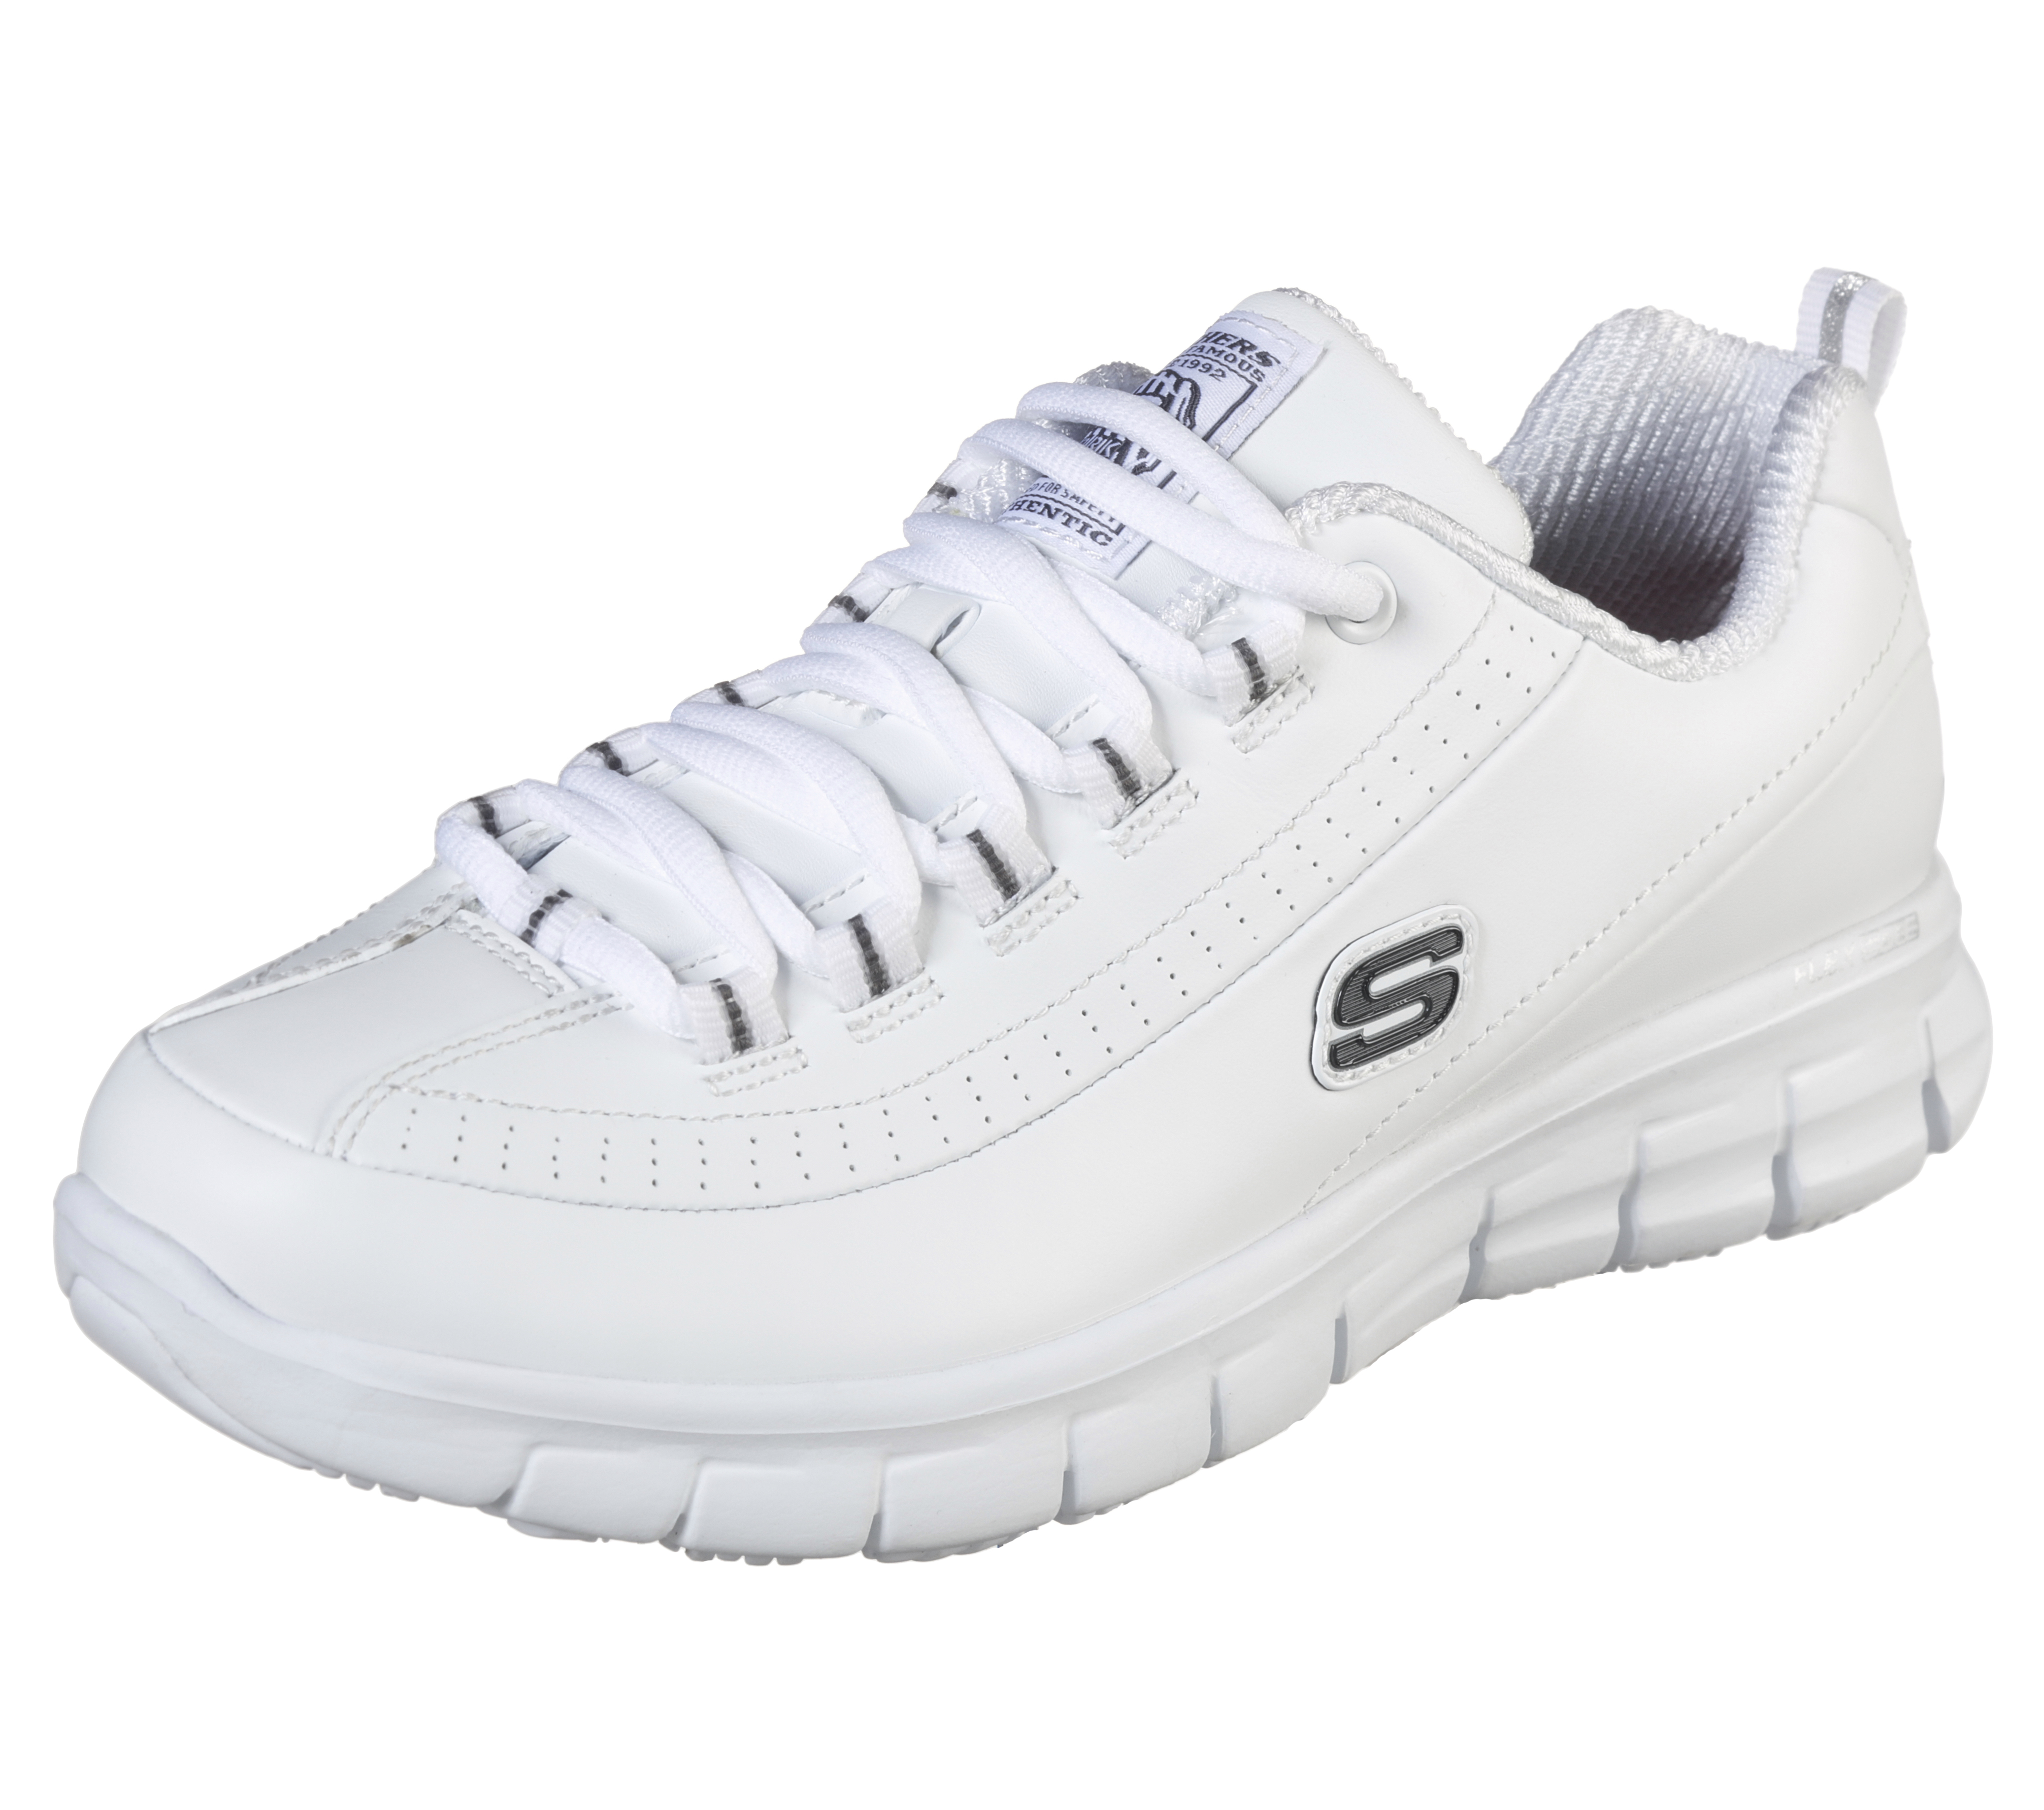 Shop the Work Relaxed Fit: Sure Track - Trickel | SKECHERS